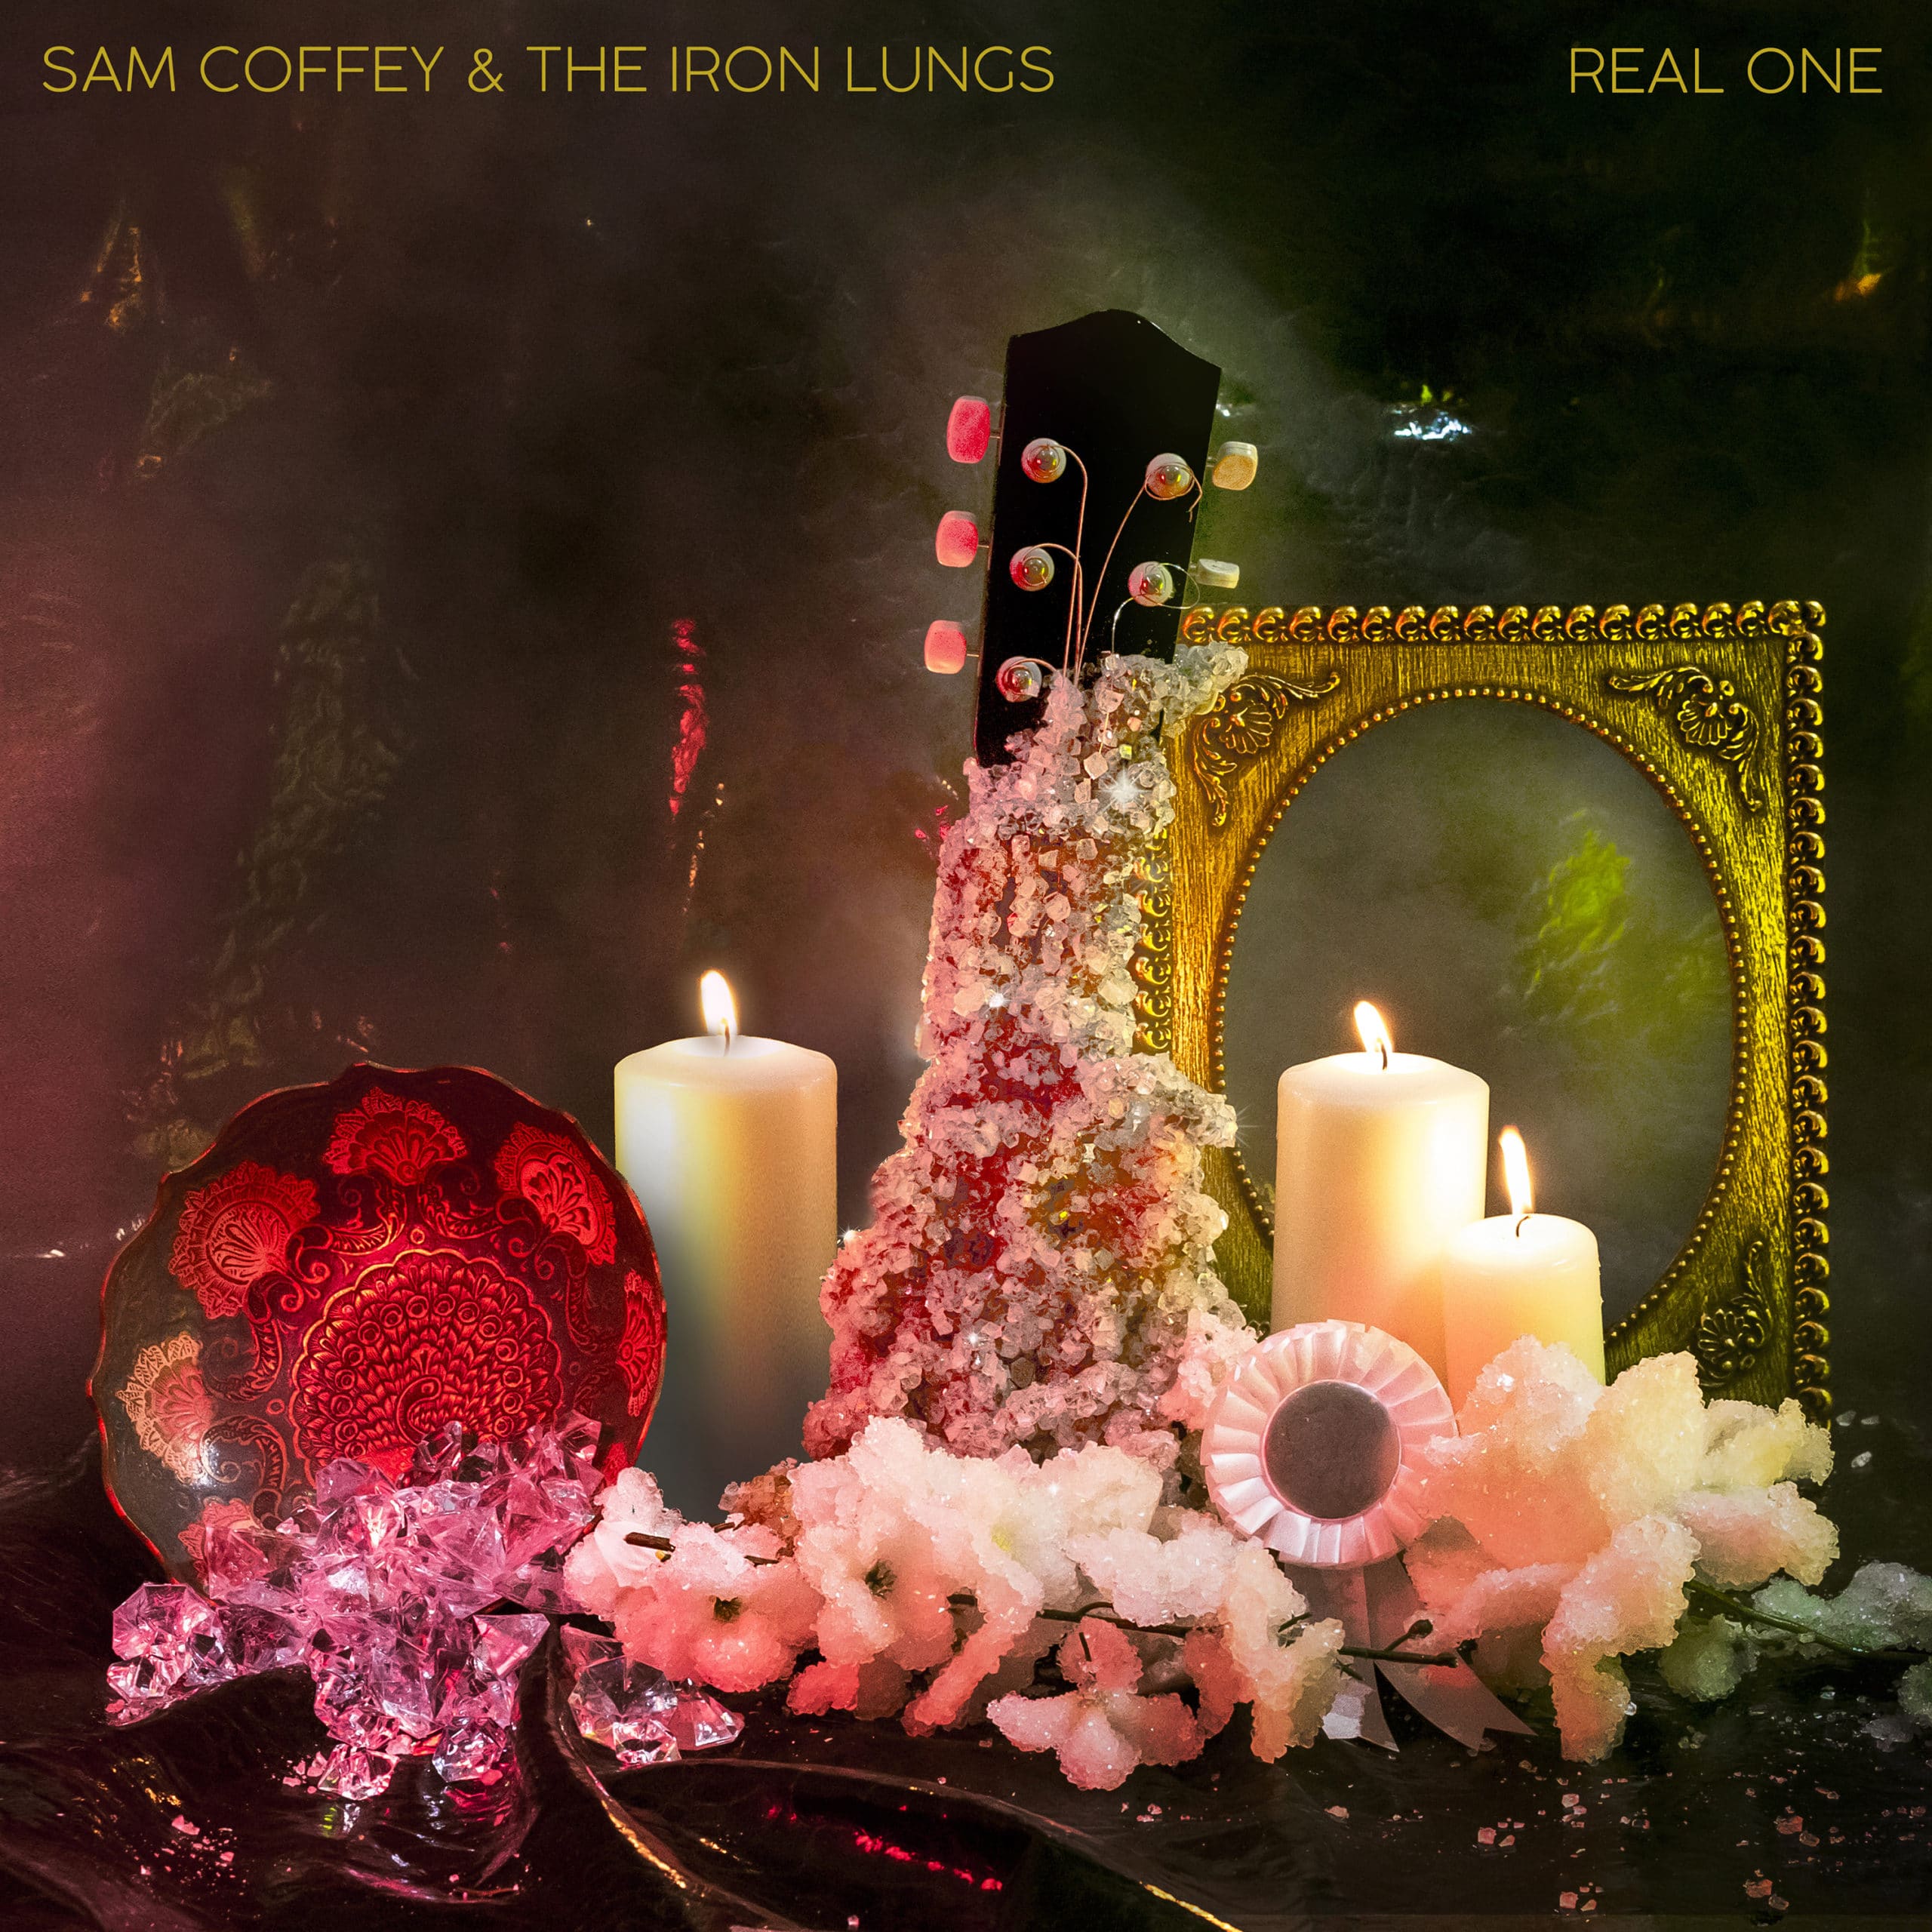 Cover for Sam Coffey and the Iron Lungs album 'Real One'. A guitar neck encrusted with diamonds surrounded by flowers and candles. Dimly lit.